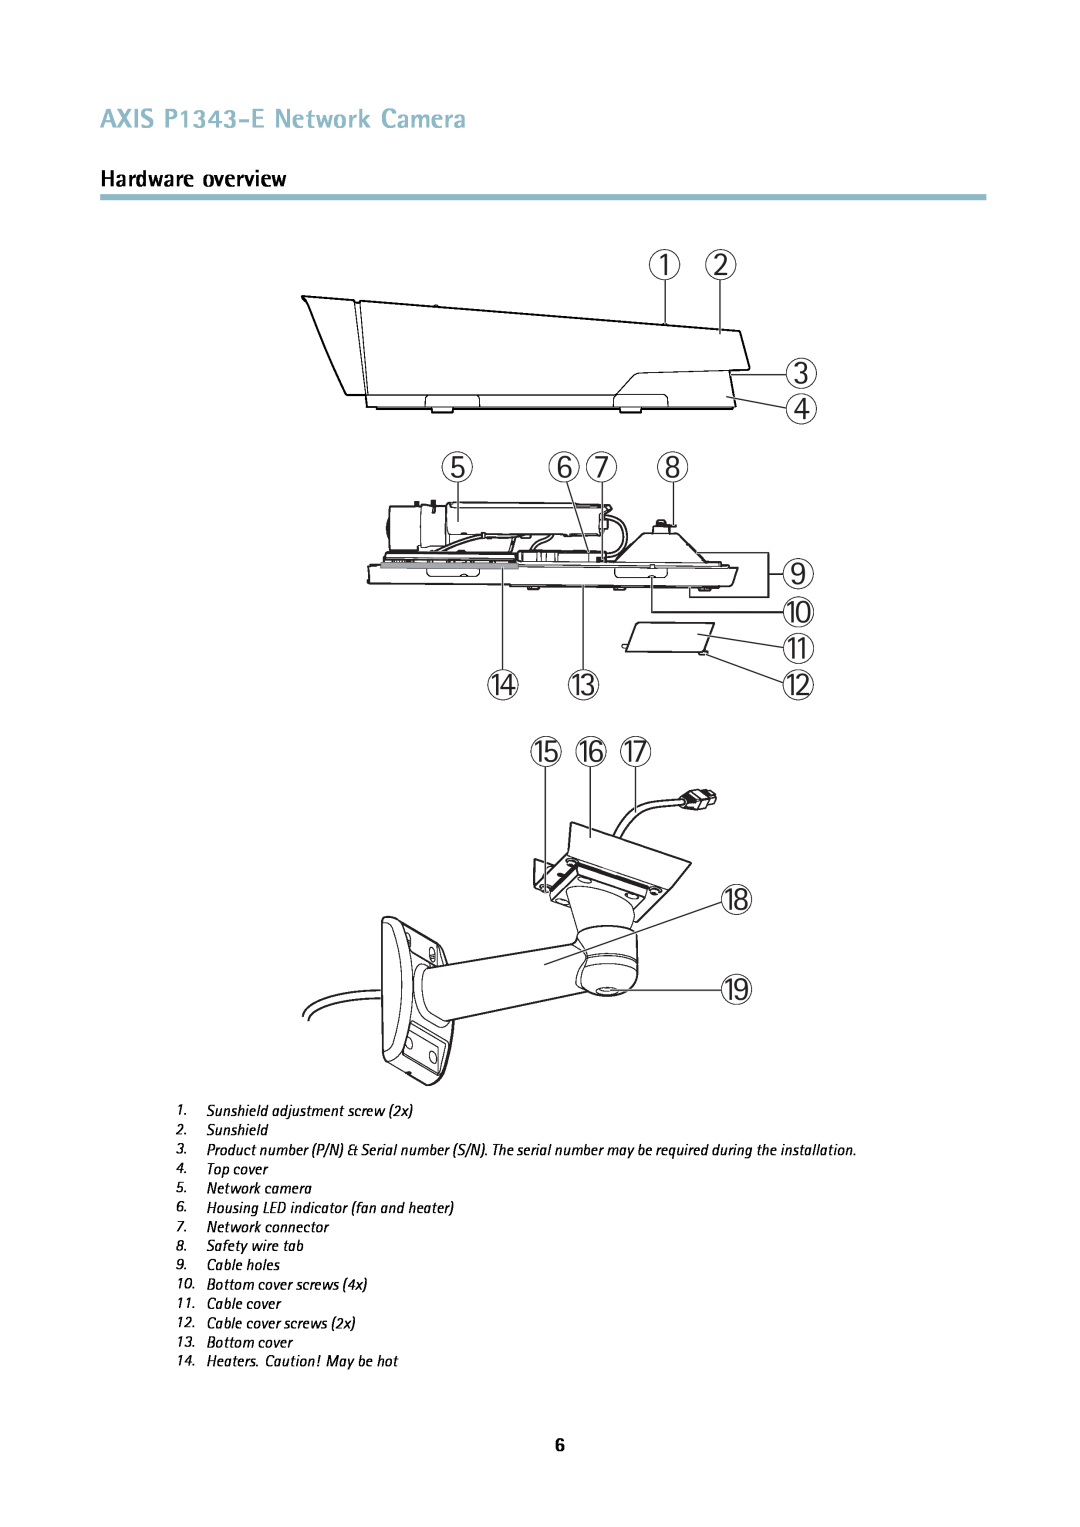 Axis Communications user manual AXIS P1343-ENetwork Camera, Hardware overview, Sunshield adjustment screw 2.Sunshield 